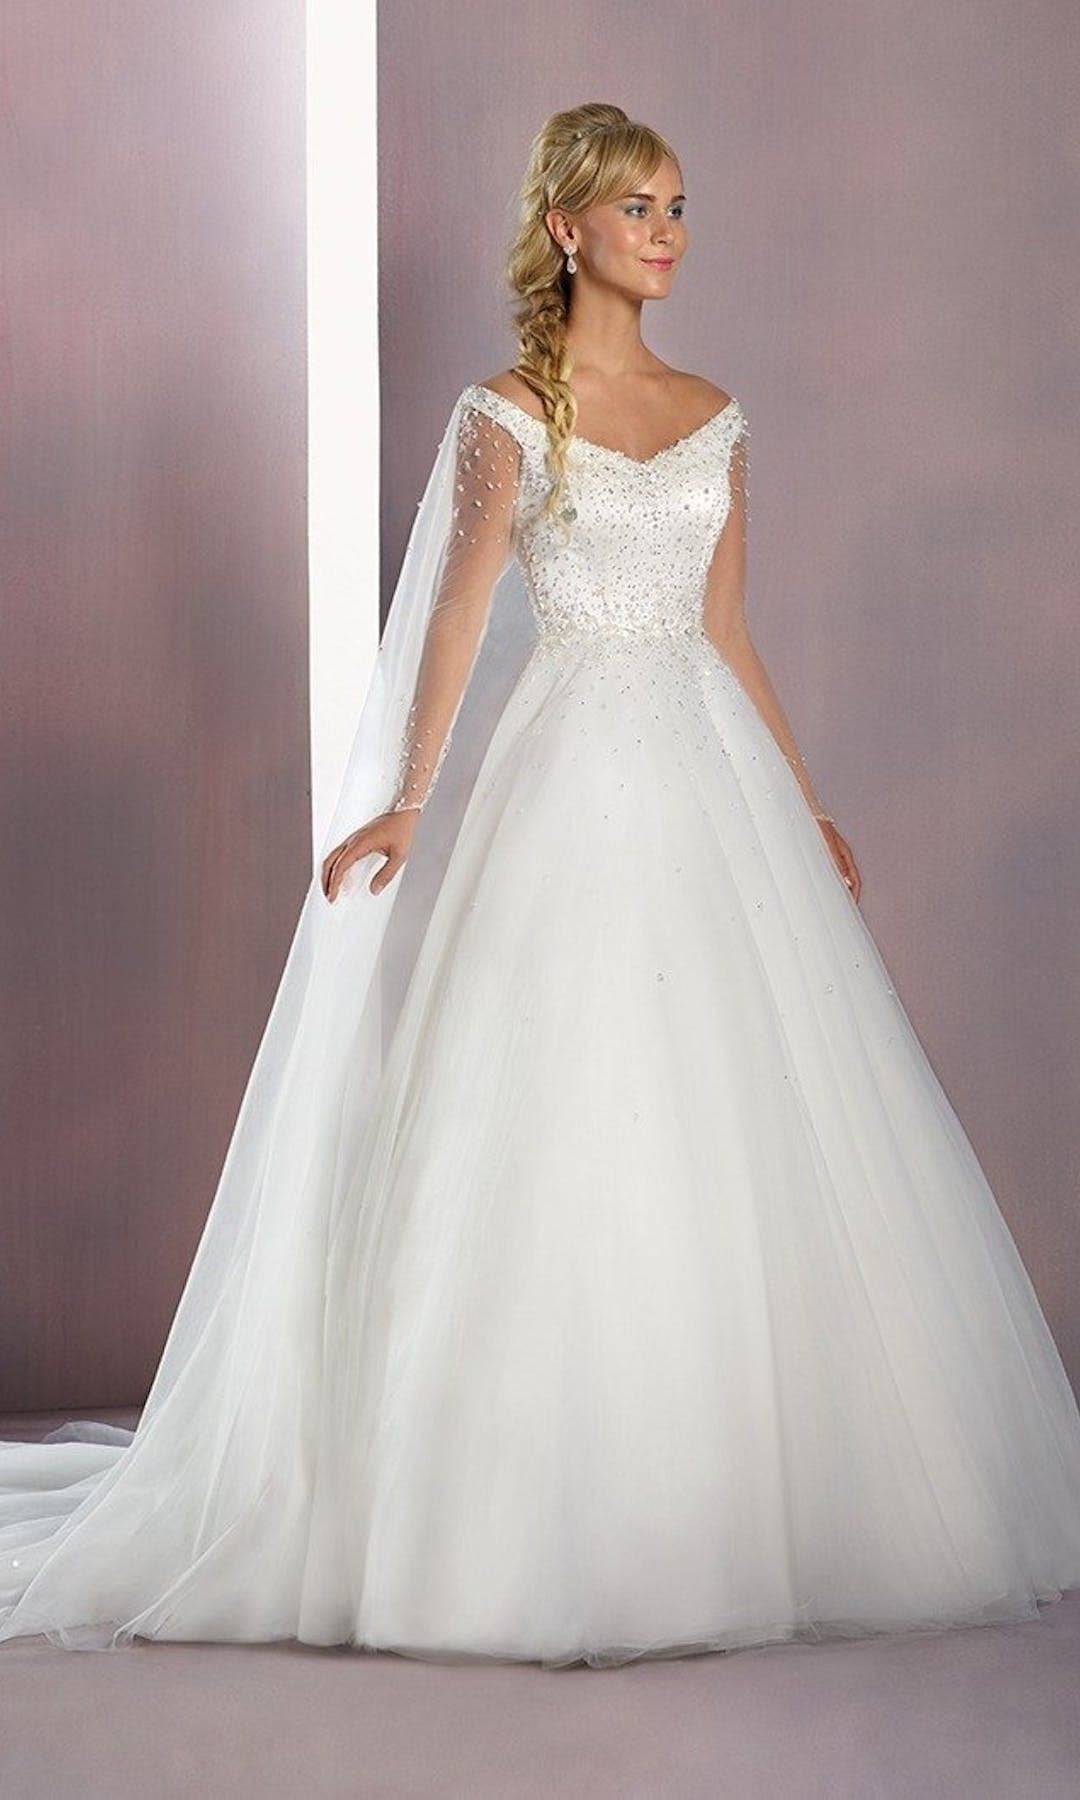 [For Rent ONLY] Elsa Disney Fairy Tale Wedding Dress in Ivory (Ball Gown) - AA258 - Blossom Wedding